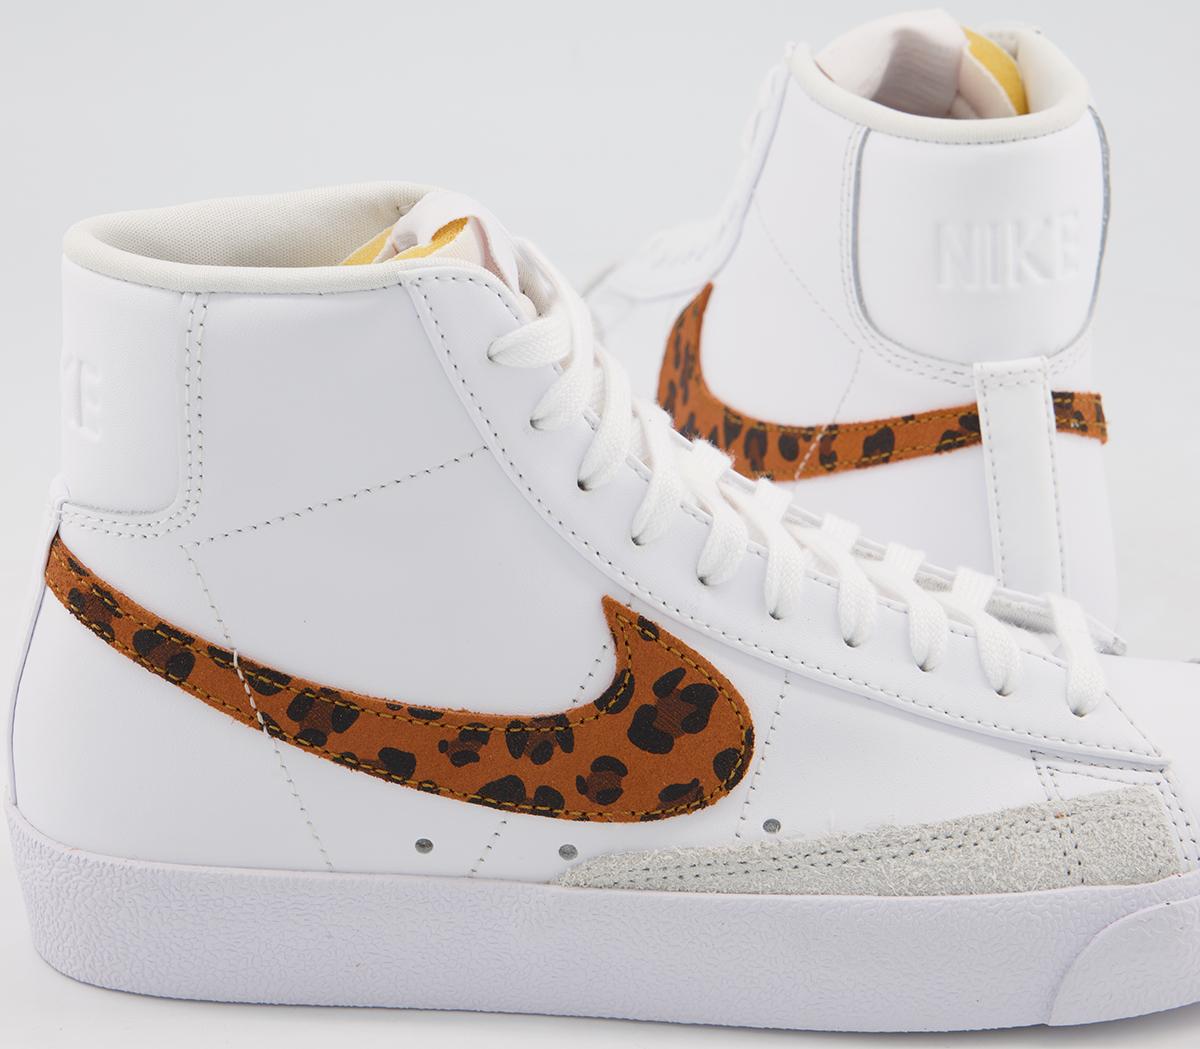 Nike Blazer Mid 77 Trainers White White Leopard - Hers trainers